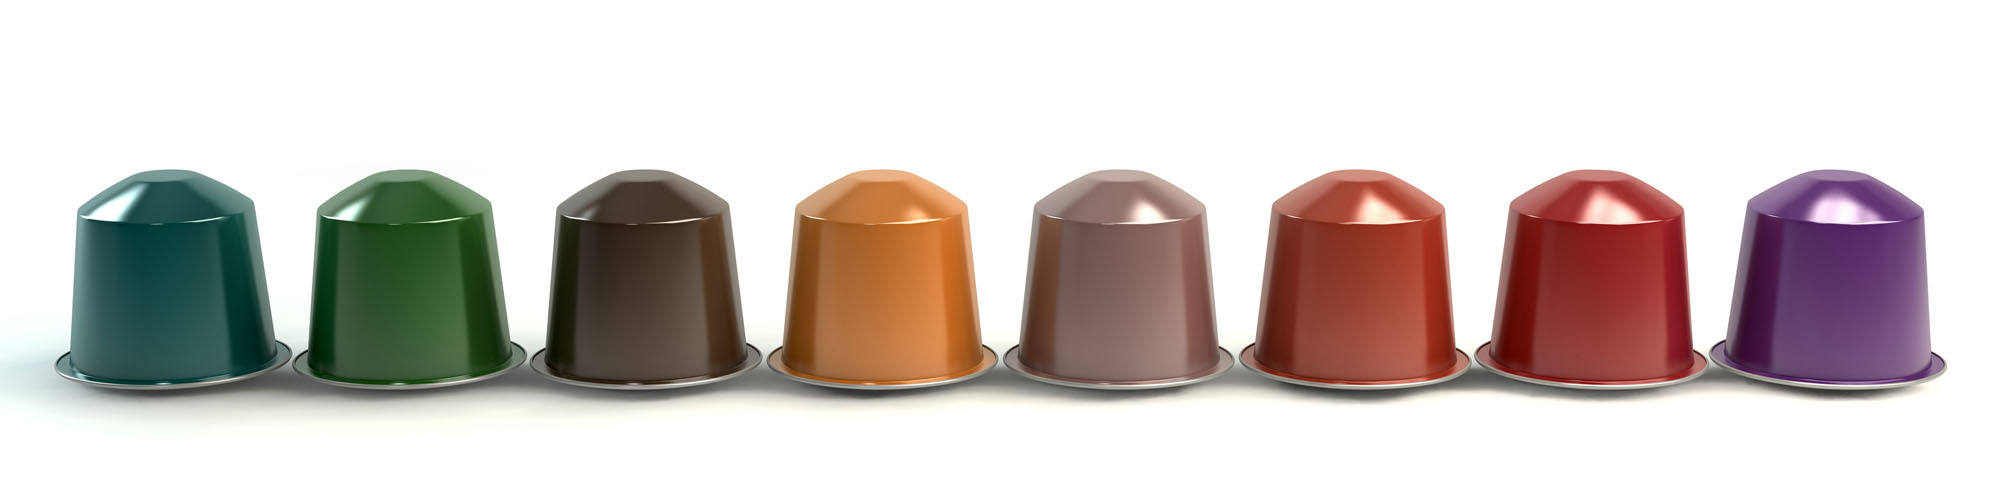 colored coffee pods k-cups